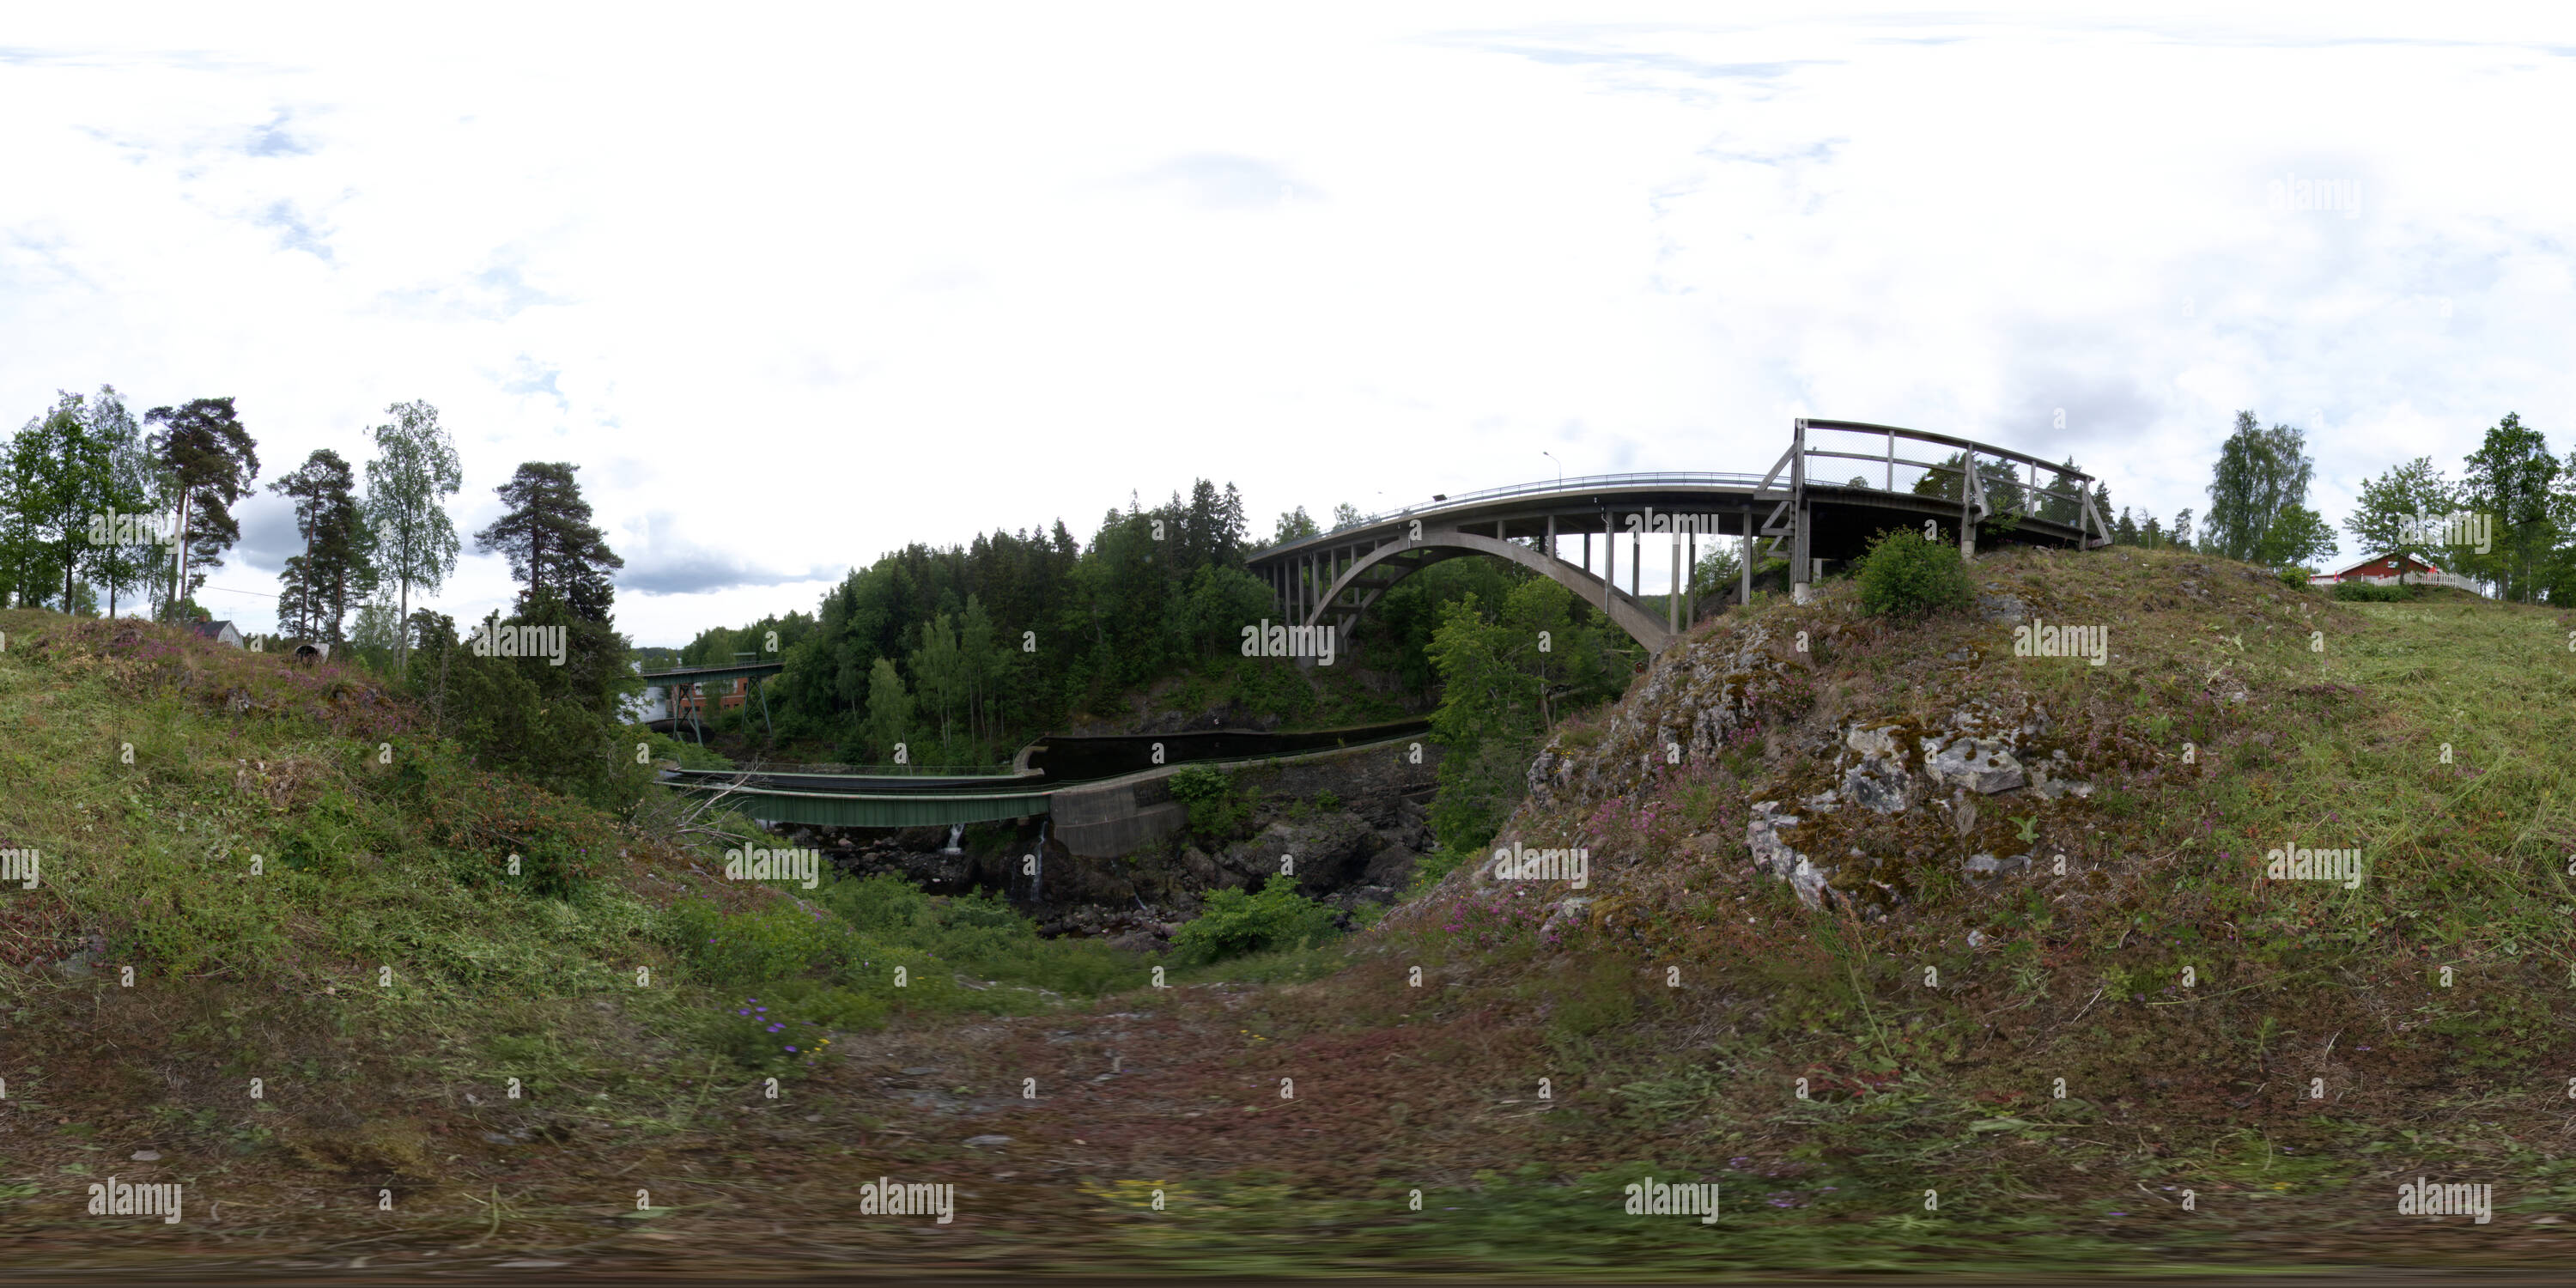 360 degree panoramic view of Haverud Akvedukt Dalsland Sweden 2